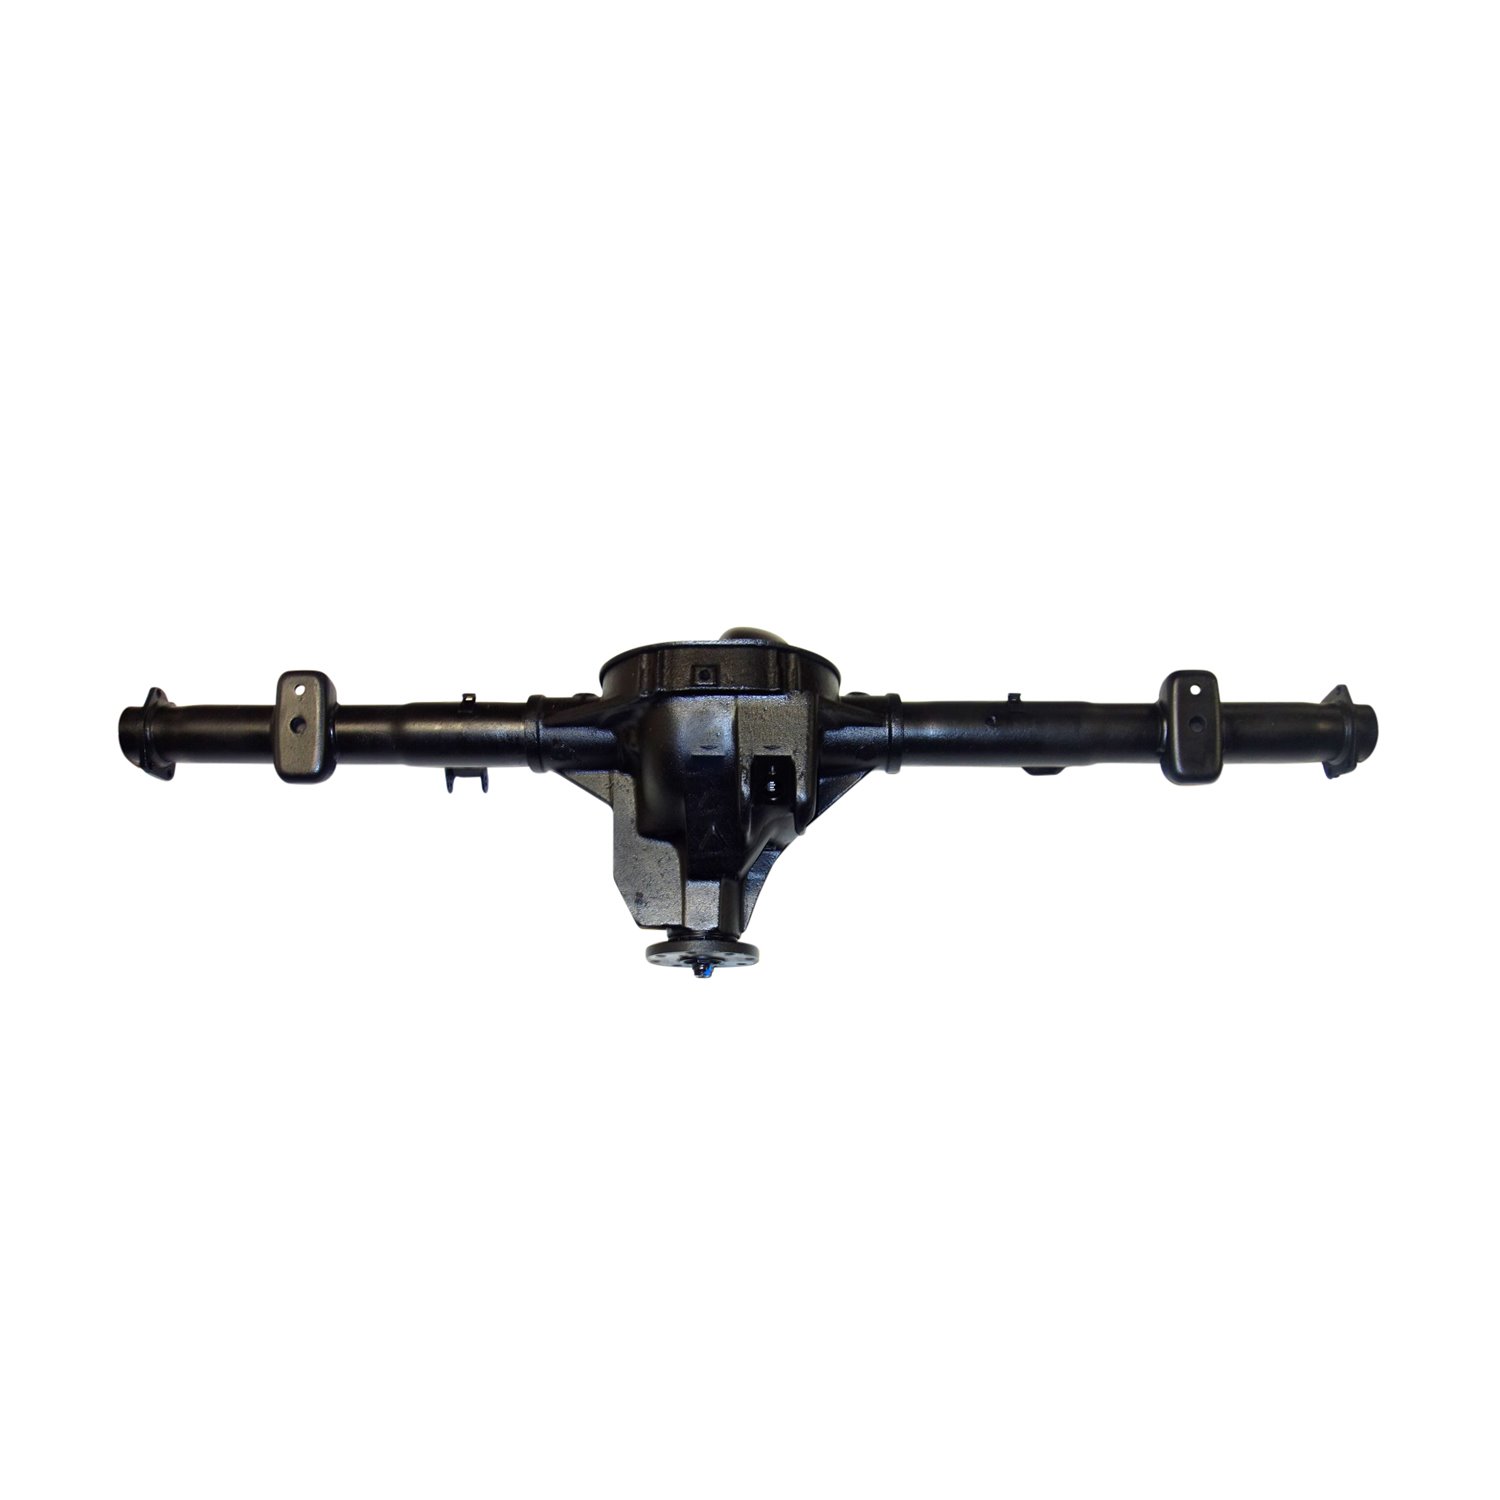 Remanufactured Axle Assy for 8.8" 01-03 Ranger 4.11 , 10" Drum Brakes *Check Tag*